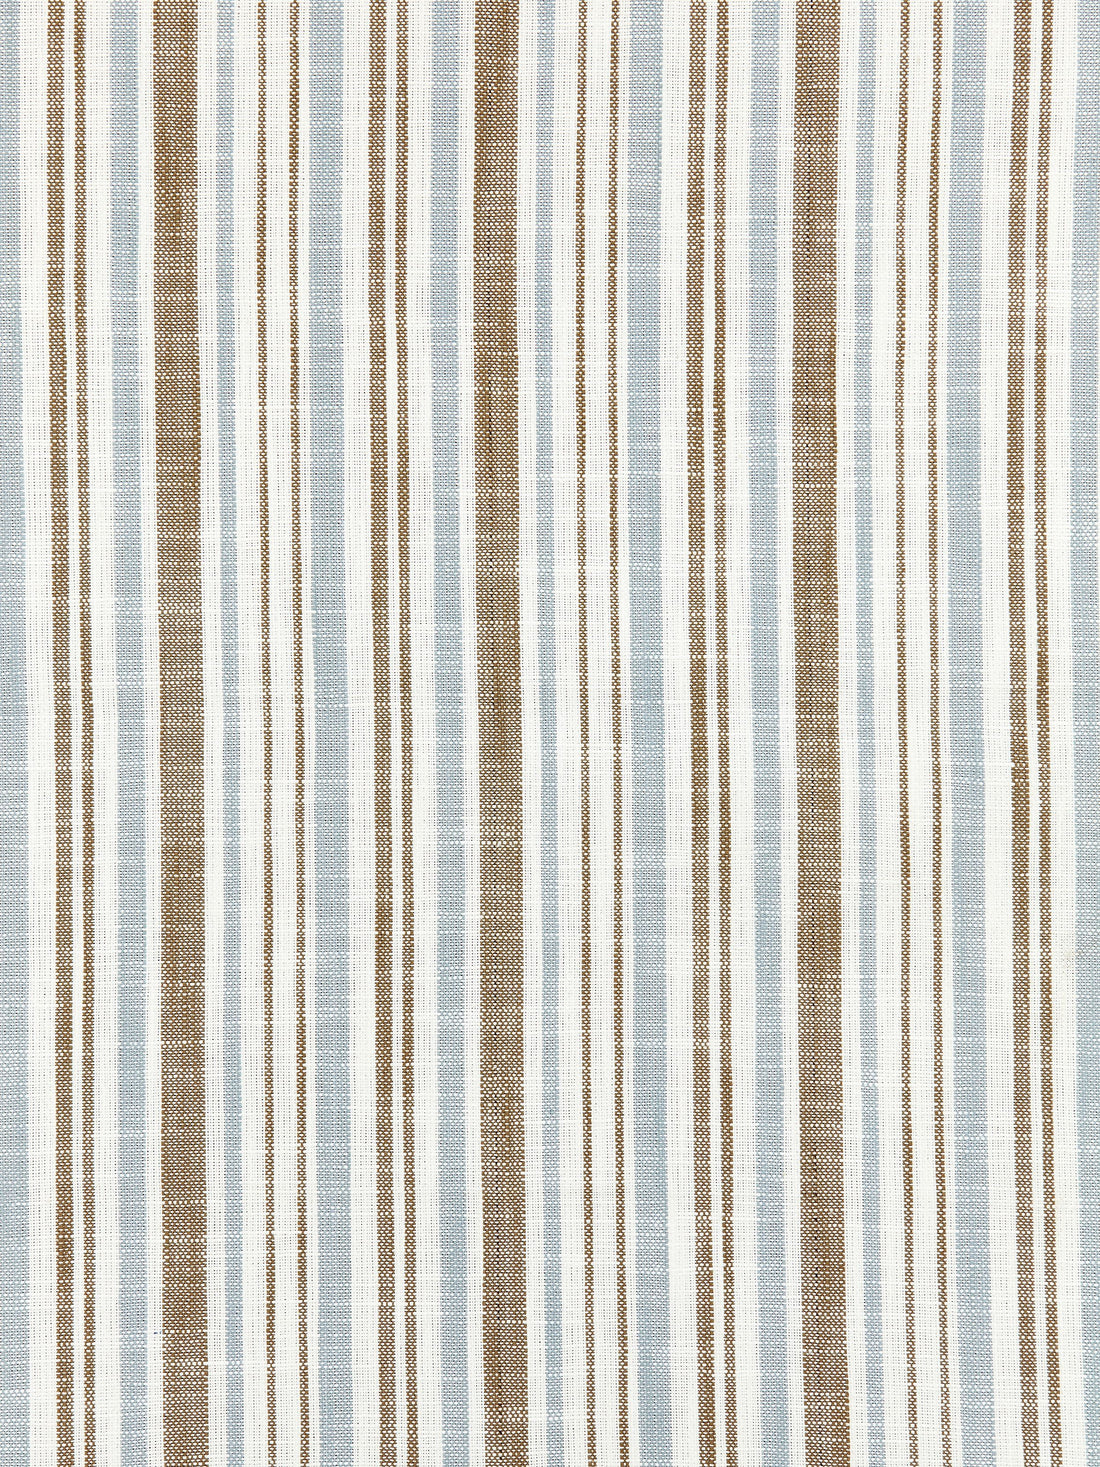 Pembroke Stripe fabric in bluestone color - pattern number SC 000227116 - by Scalamandre in the Scalamandre Fabrics Book 1 collection